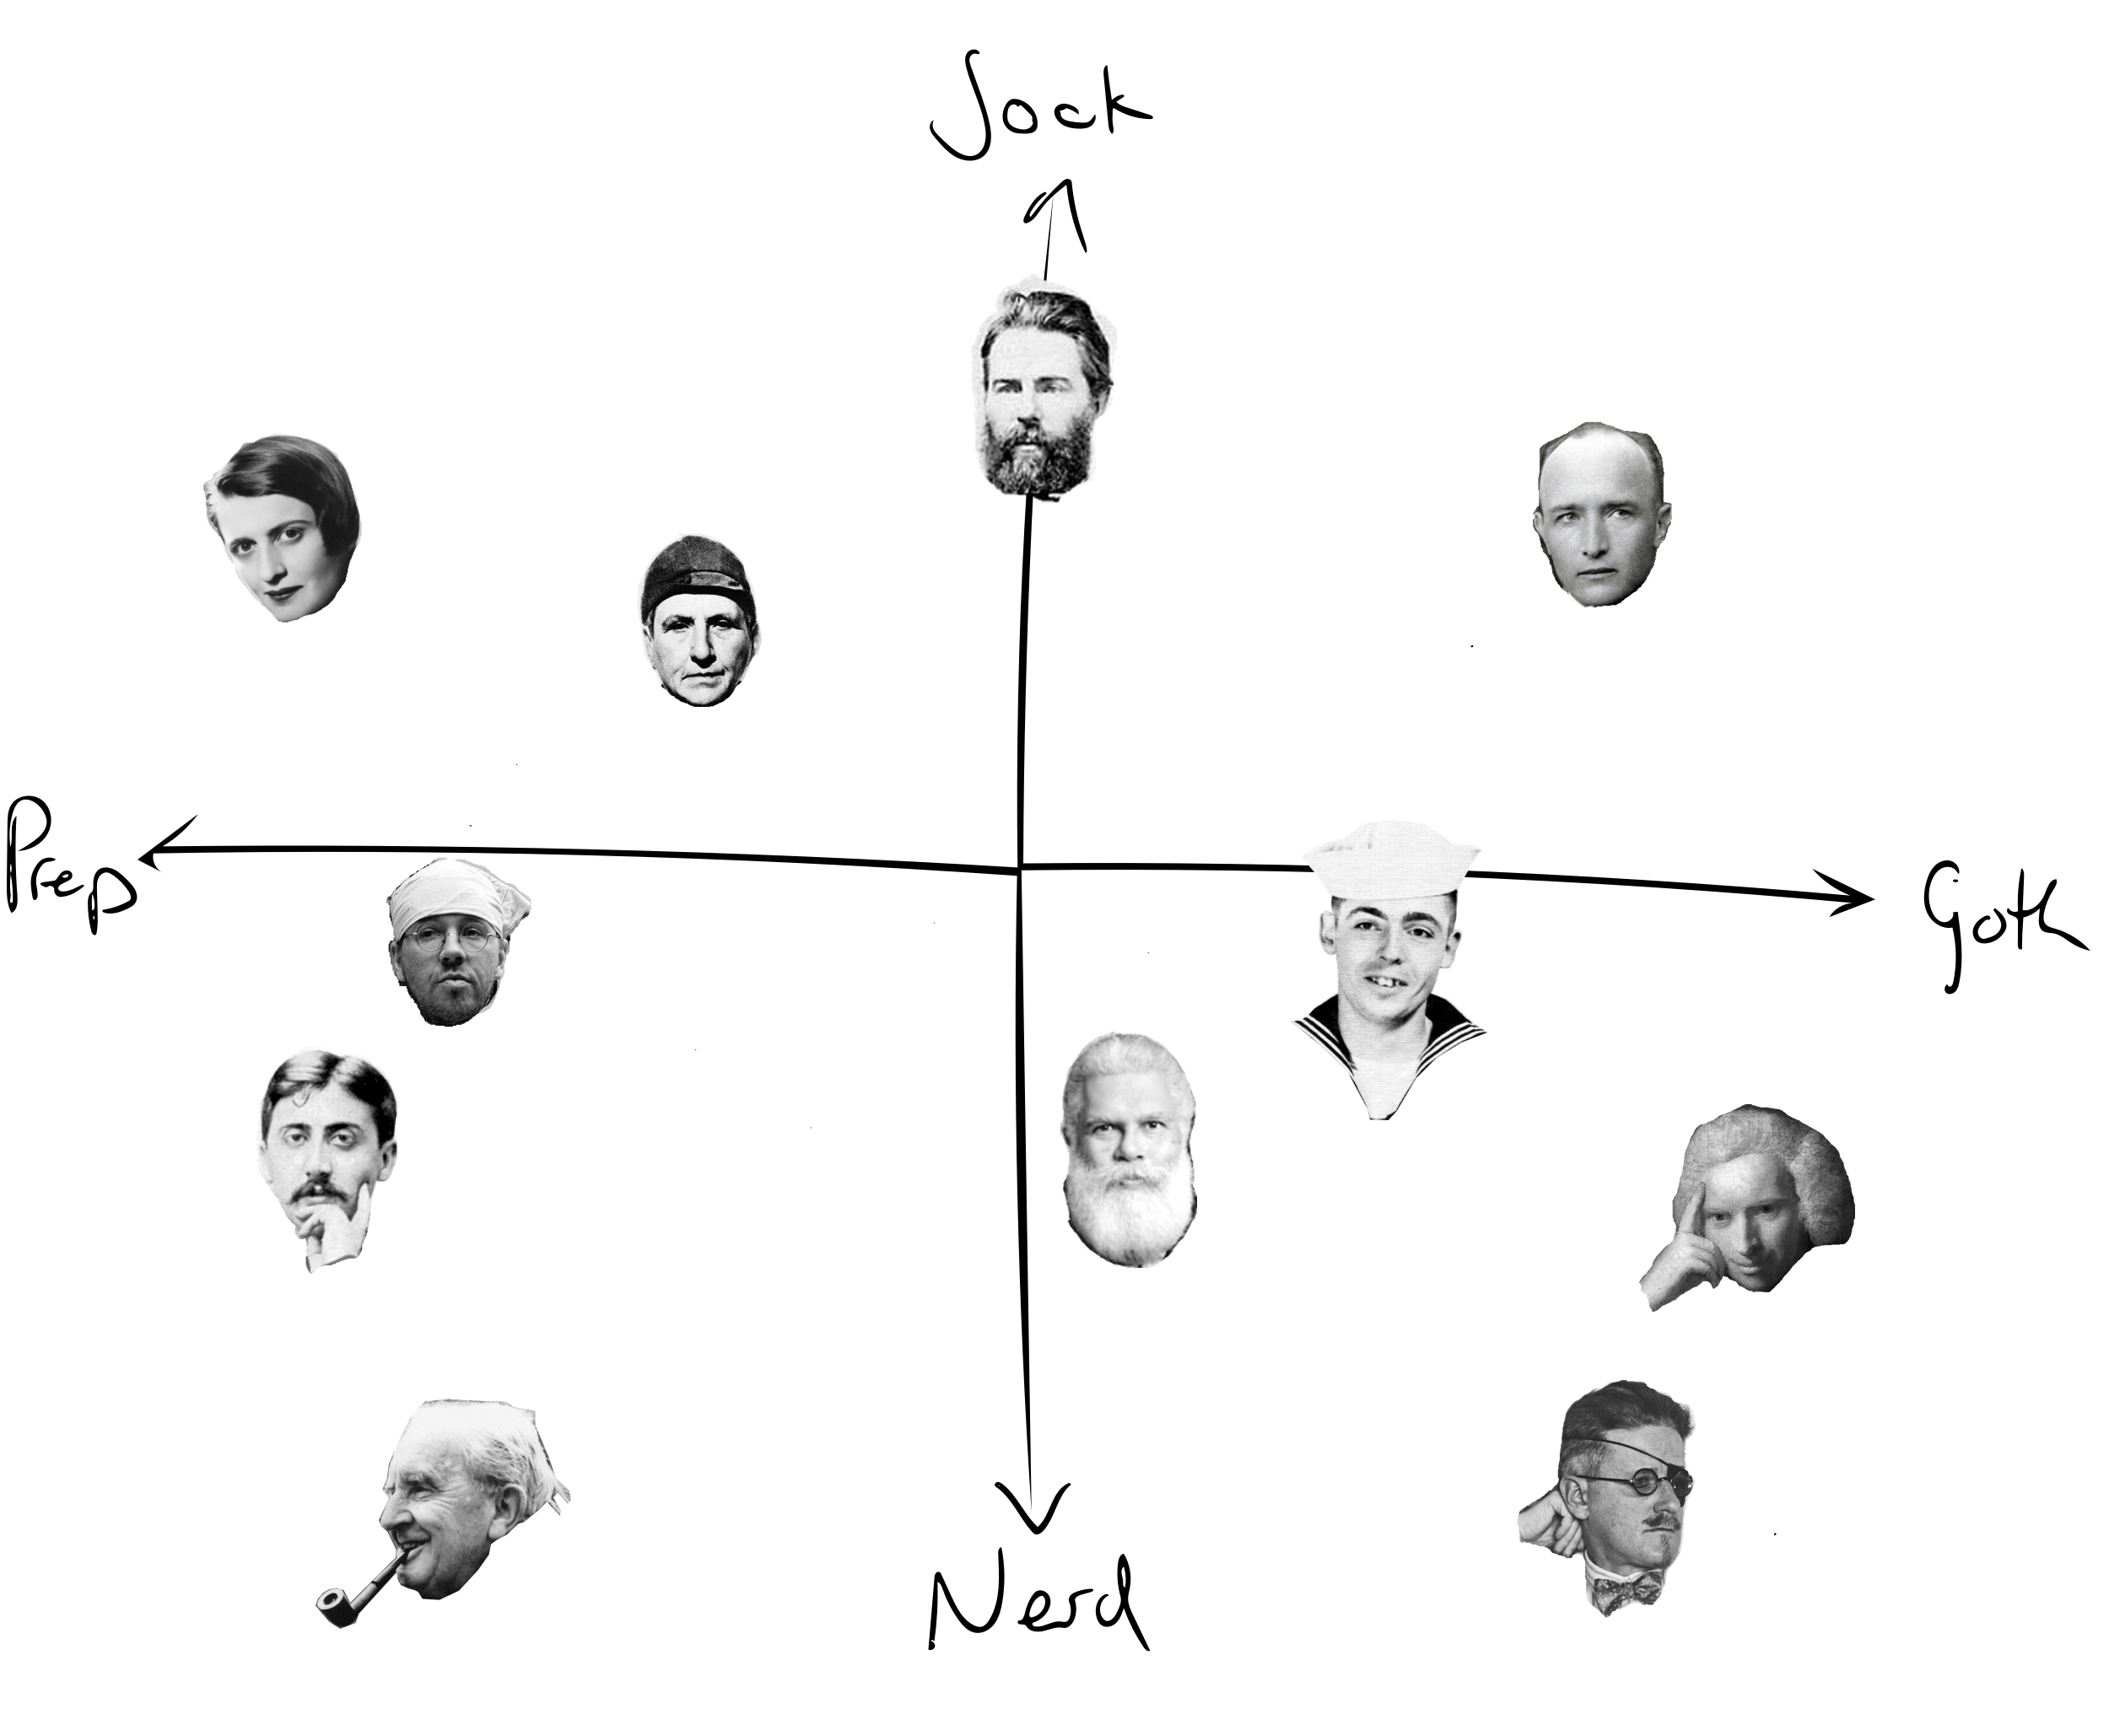 A scatter-plot meme showing a bunch of authors of unfinishable books on the goth-prep and jock-nerd axes